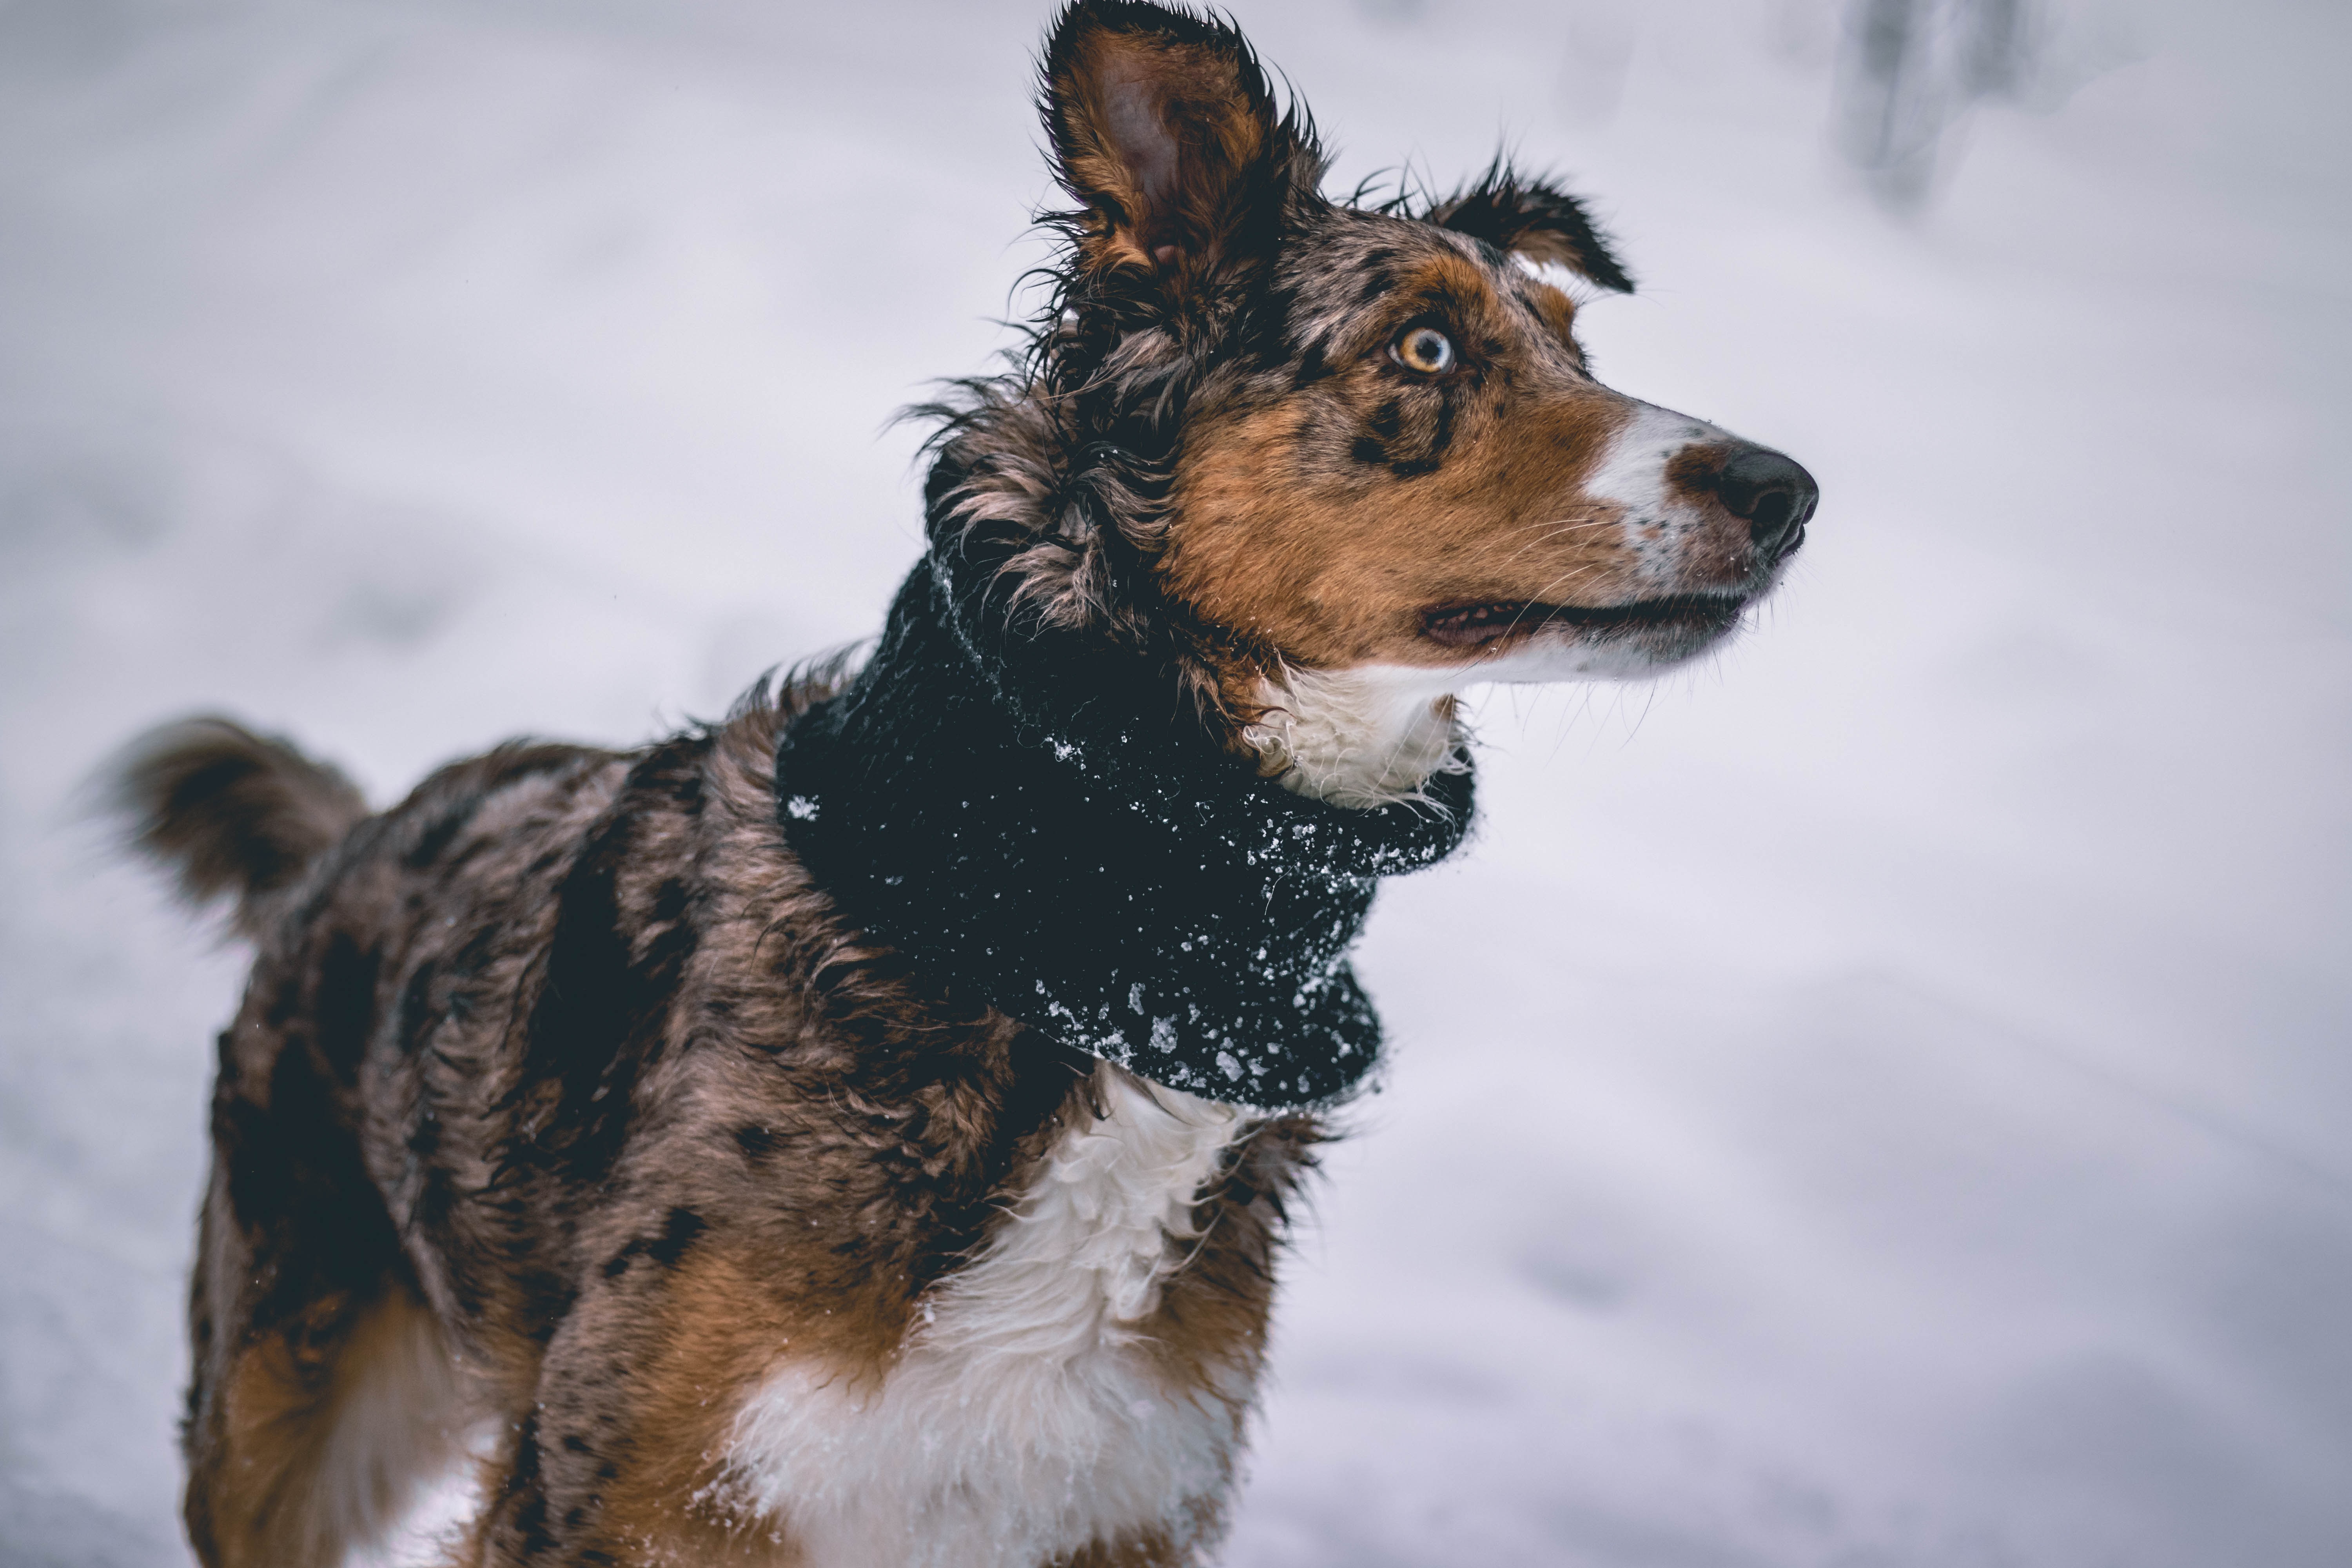 7 WAYS TO STAY ACTIVE (AND SAFE) WITH YOUR DOG IN THE WINTER